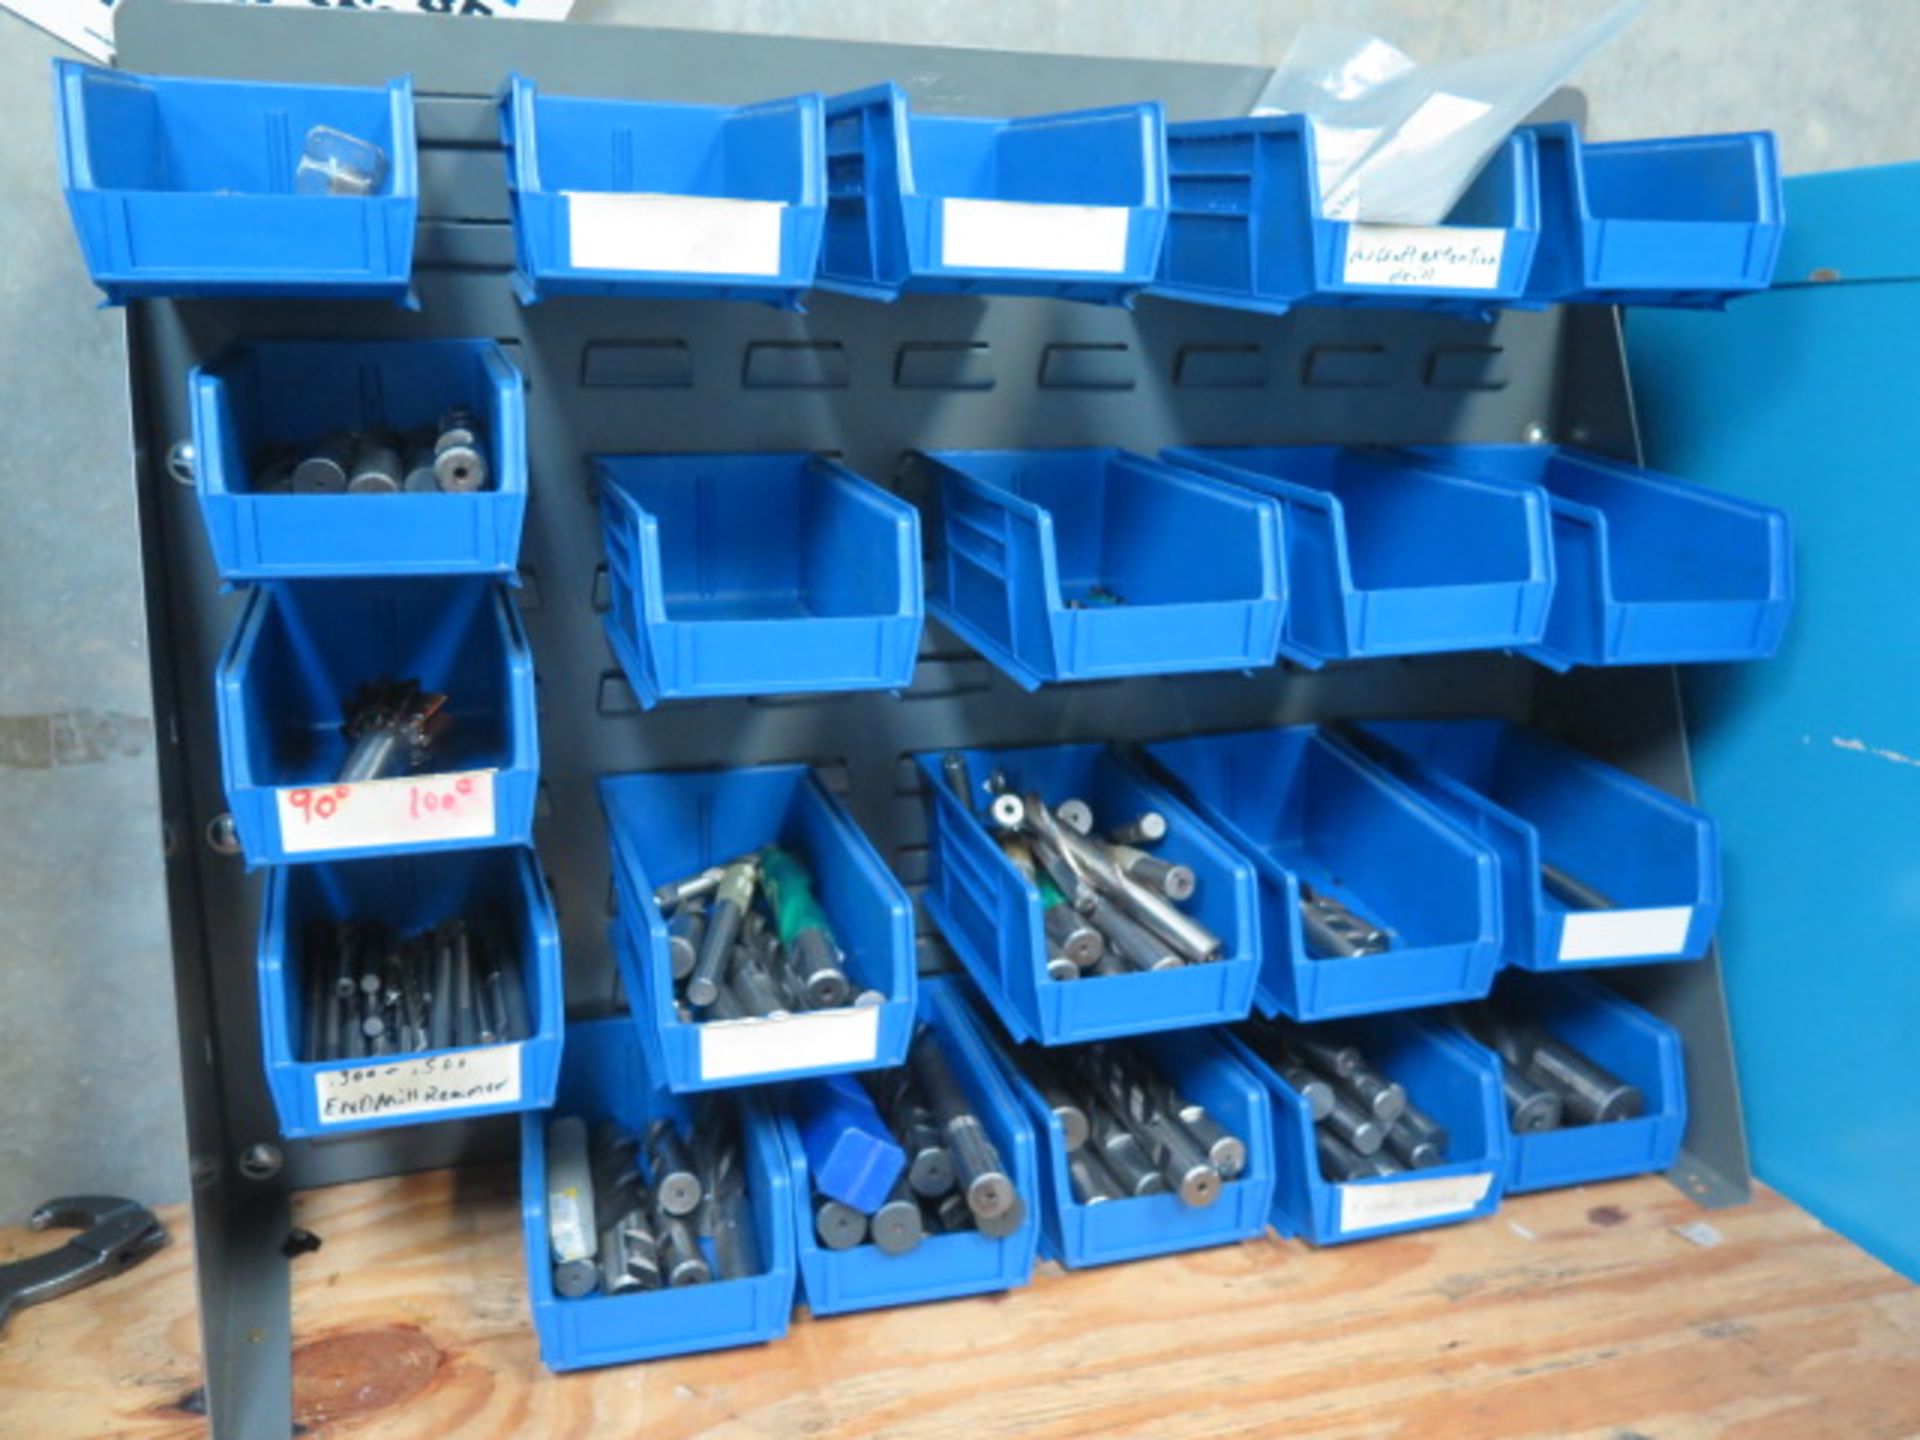 Drawered Cabinets w/ Drills and Bin Rack w/ Bins and Endmills (SOLD AS-IS - NO WARRANTY) - Image 2 of 8